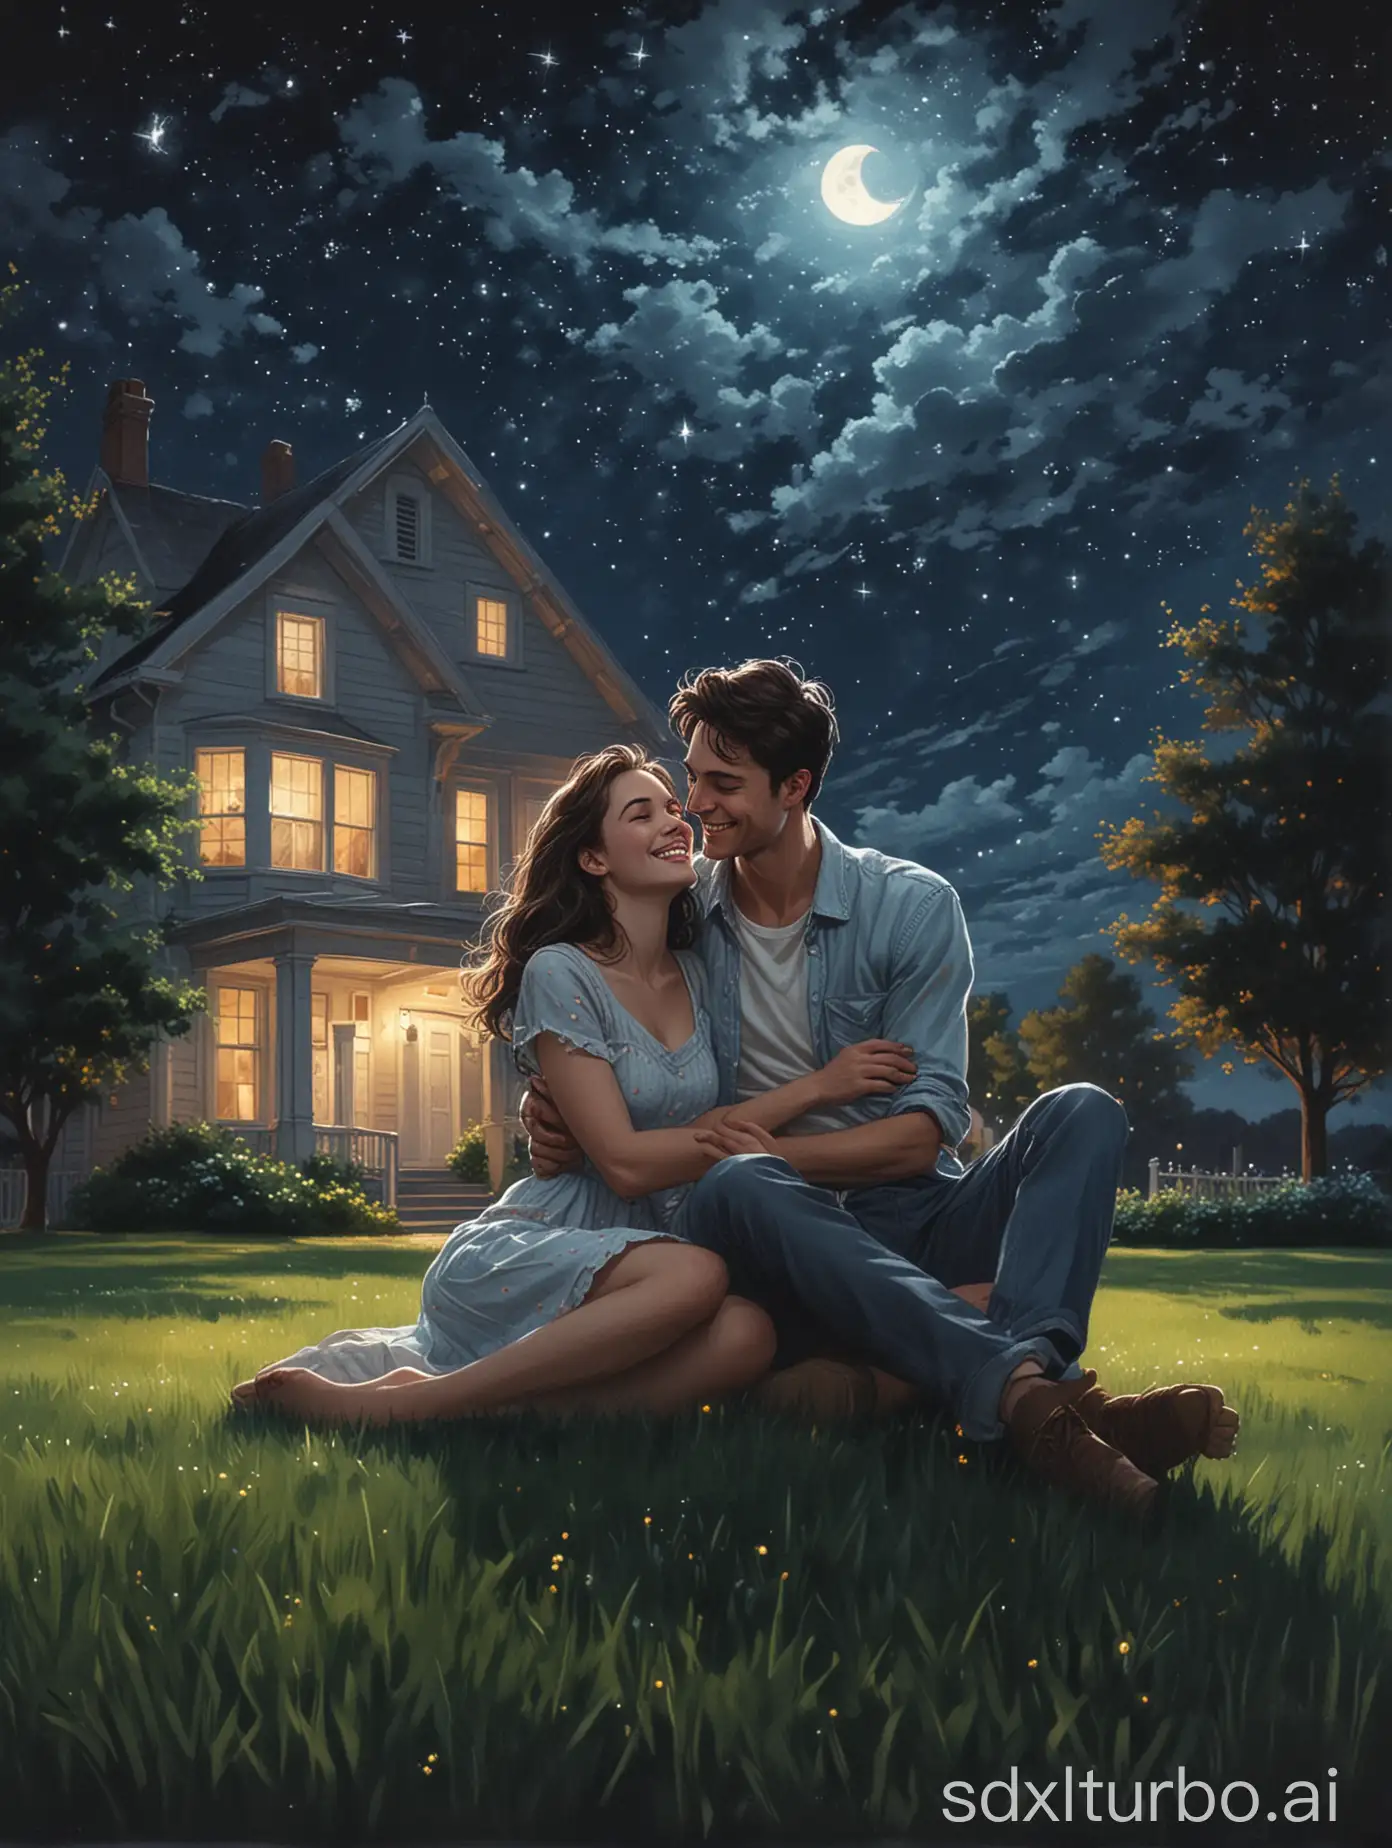 Under the bright starry sky and bright moonlight, a couple sits on the lawn and cuddles up intimately, with happy smiles